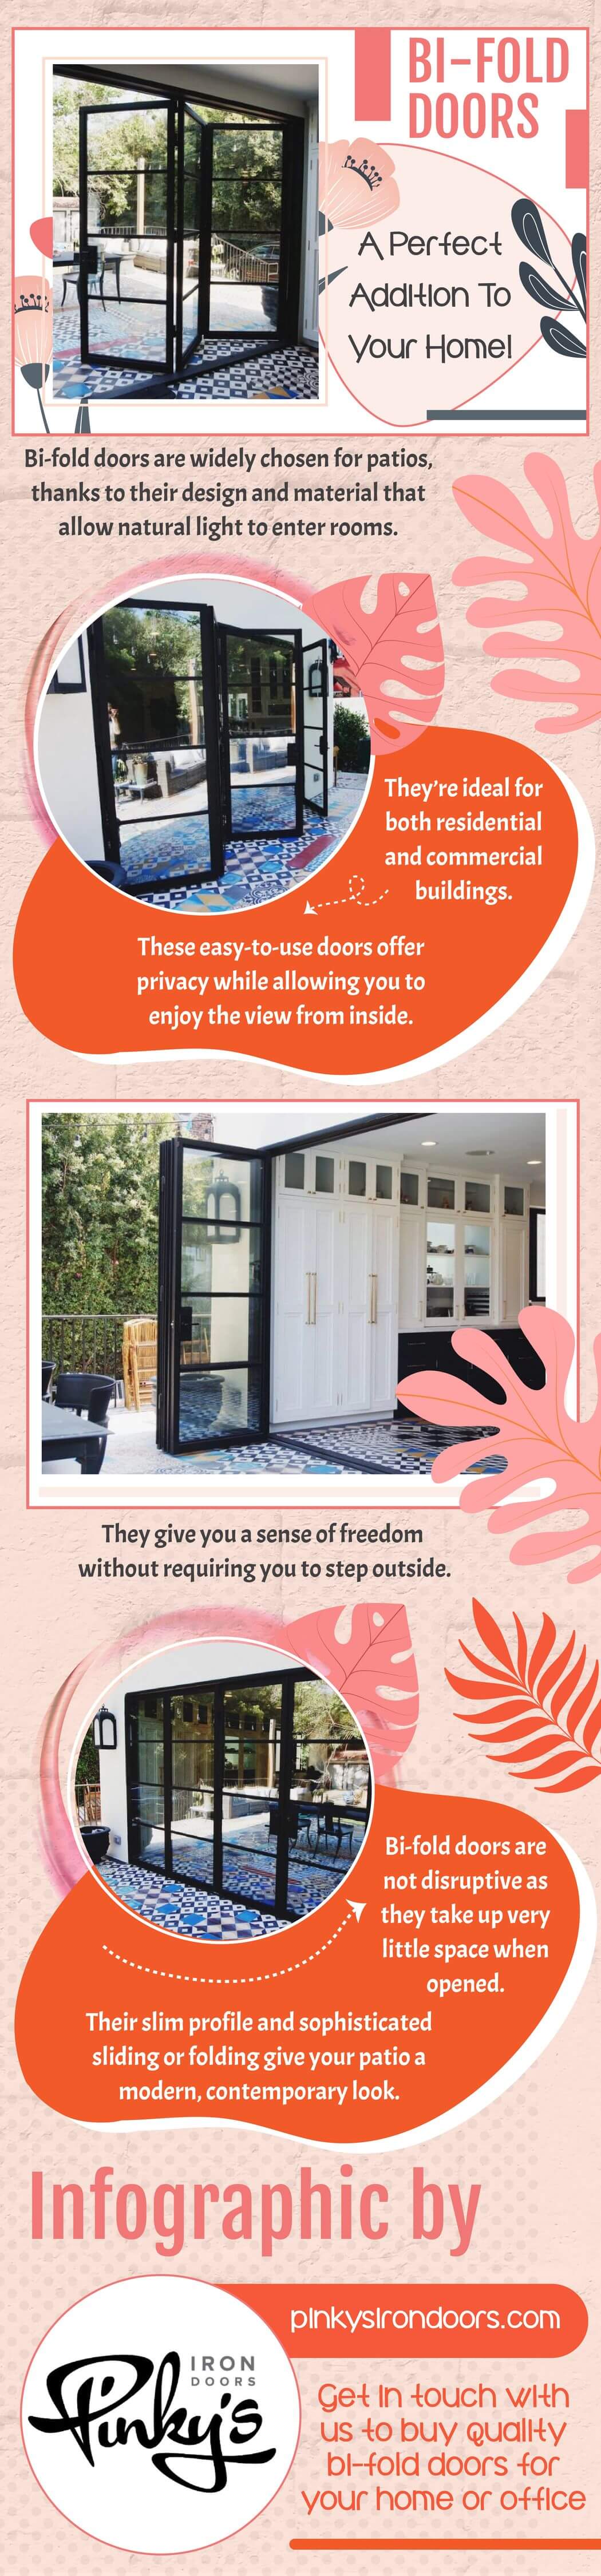 Bi-Fold Doors A Perfect Addition To Your Home!